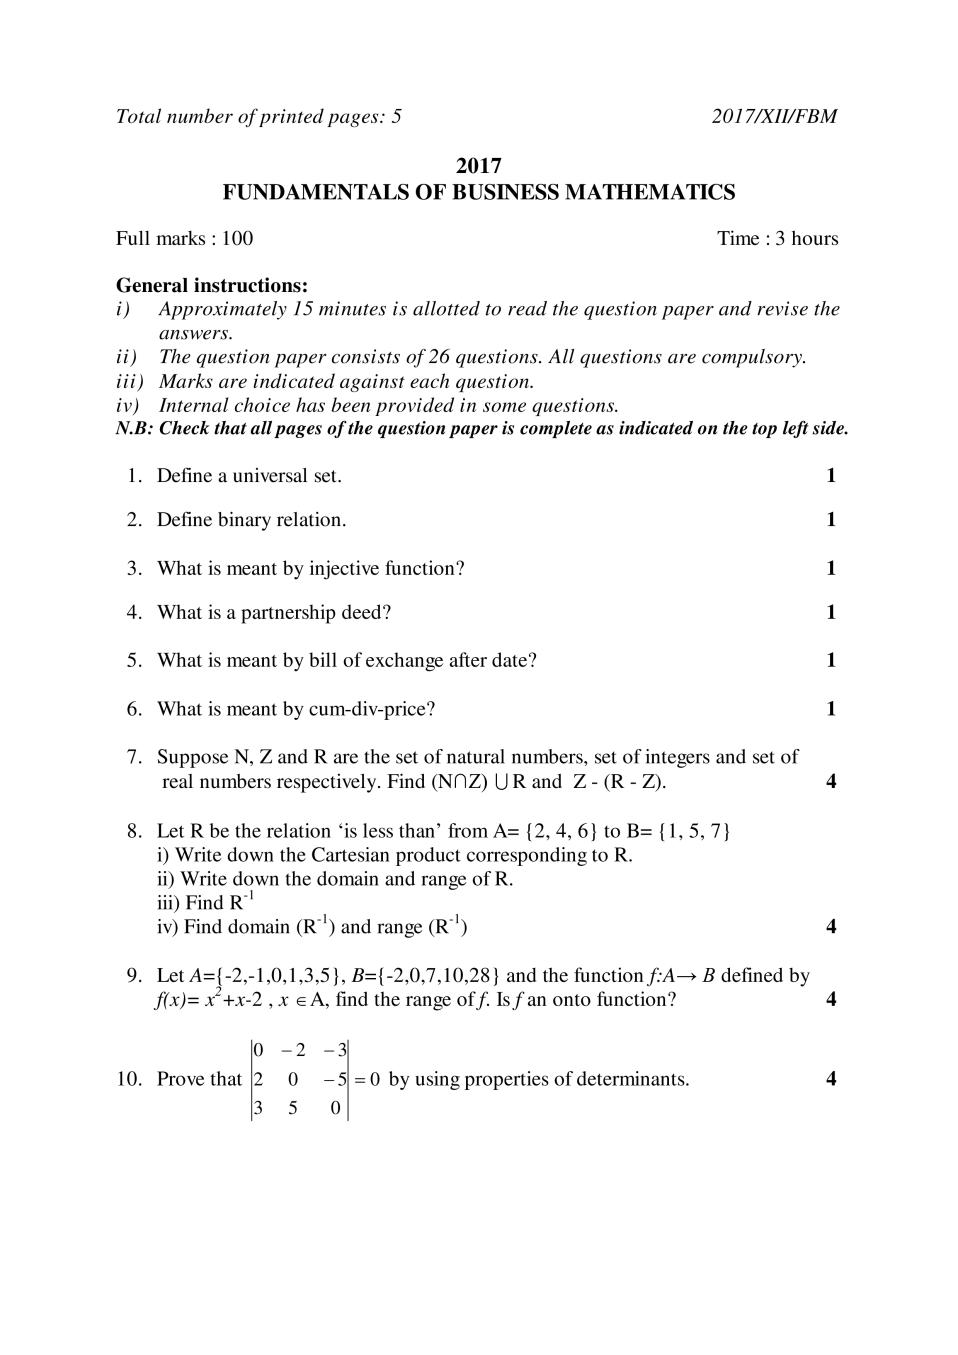 NBSE Class 12 Question Paper 2017 for Fund.of Business Maths - Page 1